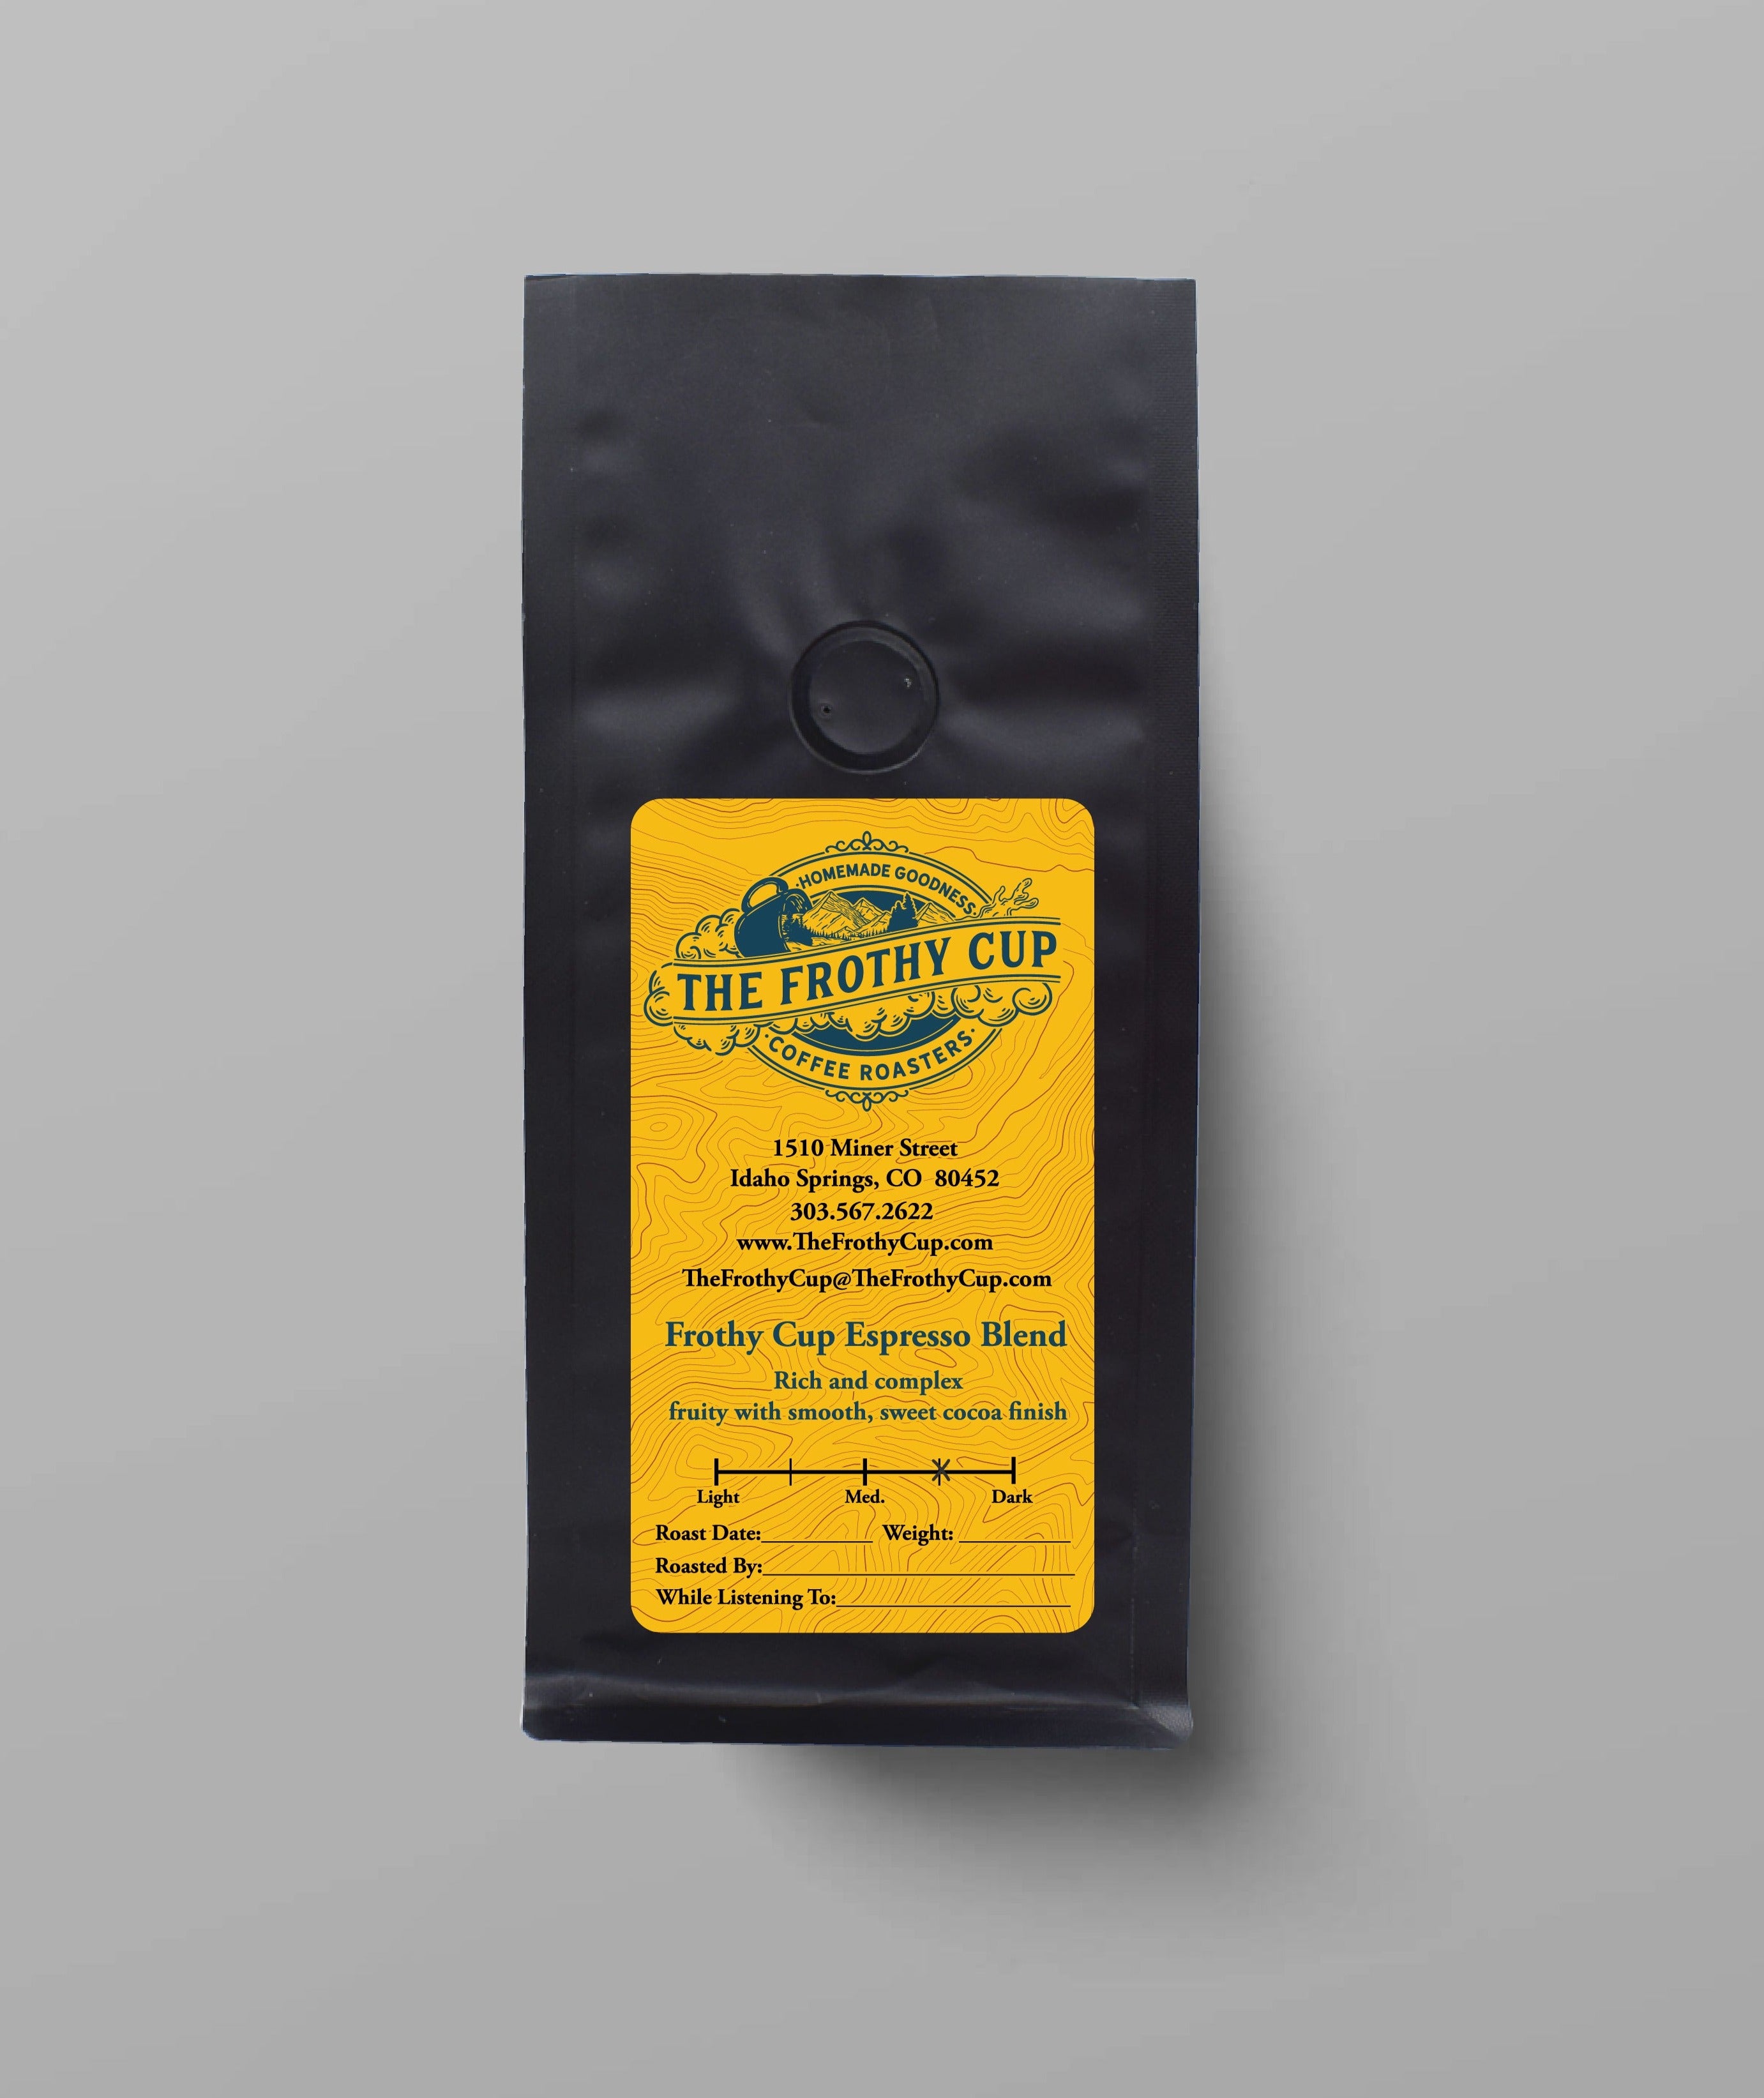 The Frothy Cup Espresso Blend